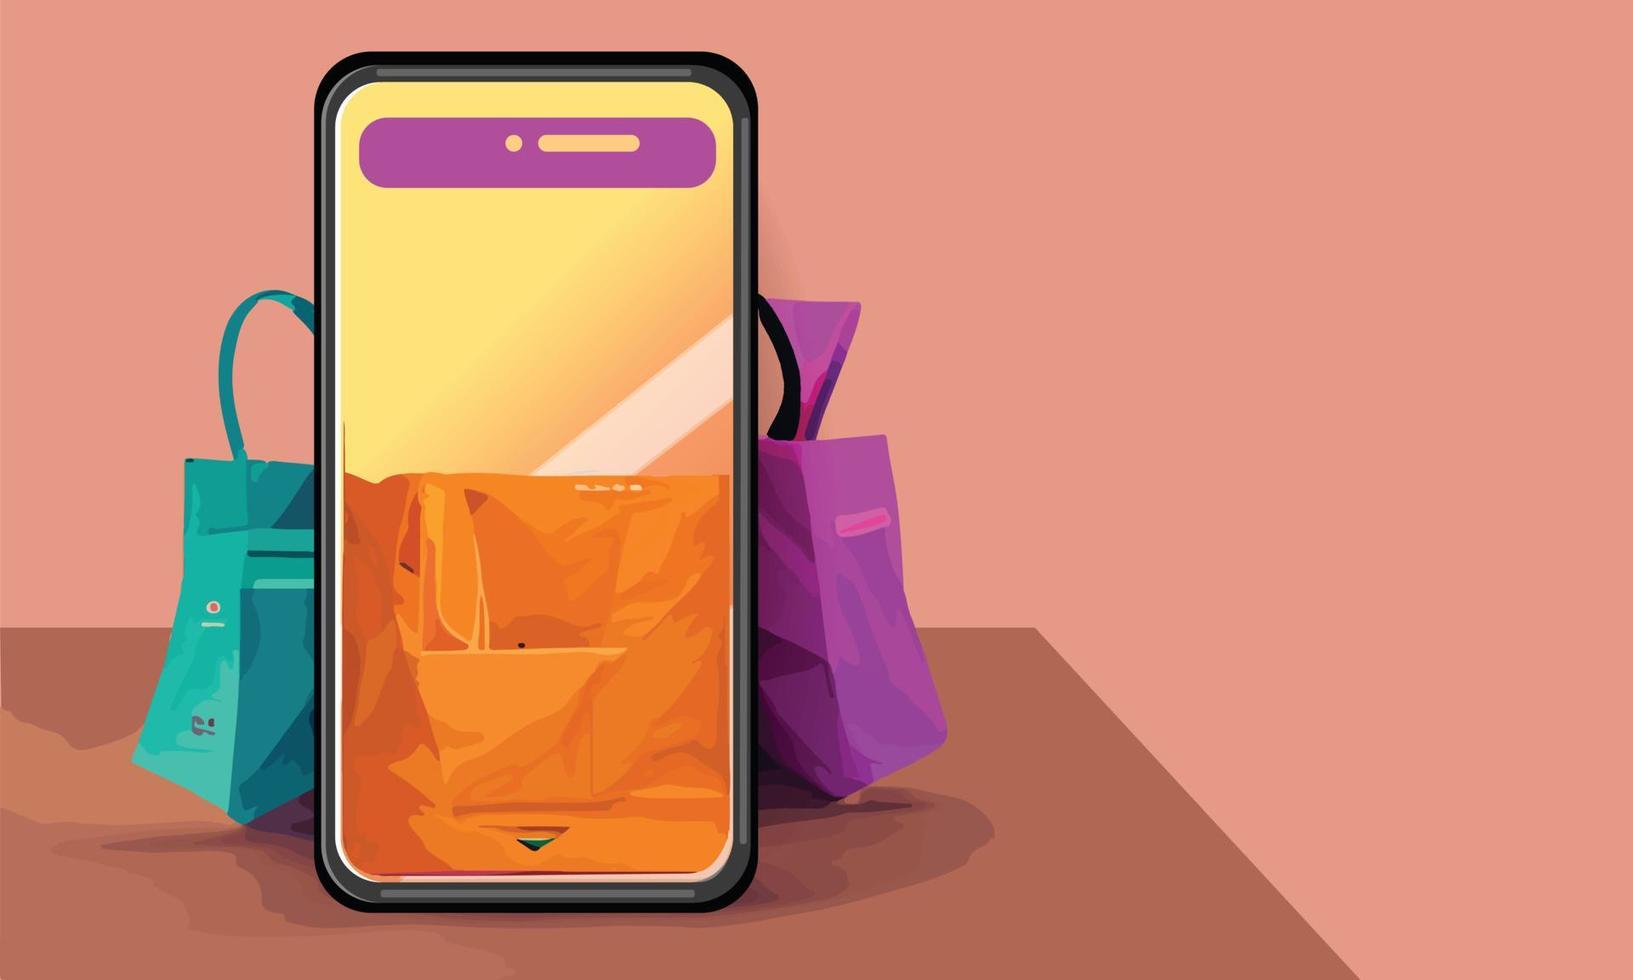 Online shopping or delivery concept illustration 3d vector show trolley, bags and boxes. Modern trendy design bright colors on smartphone